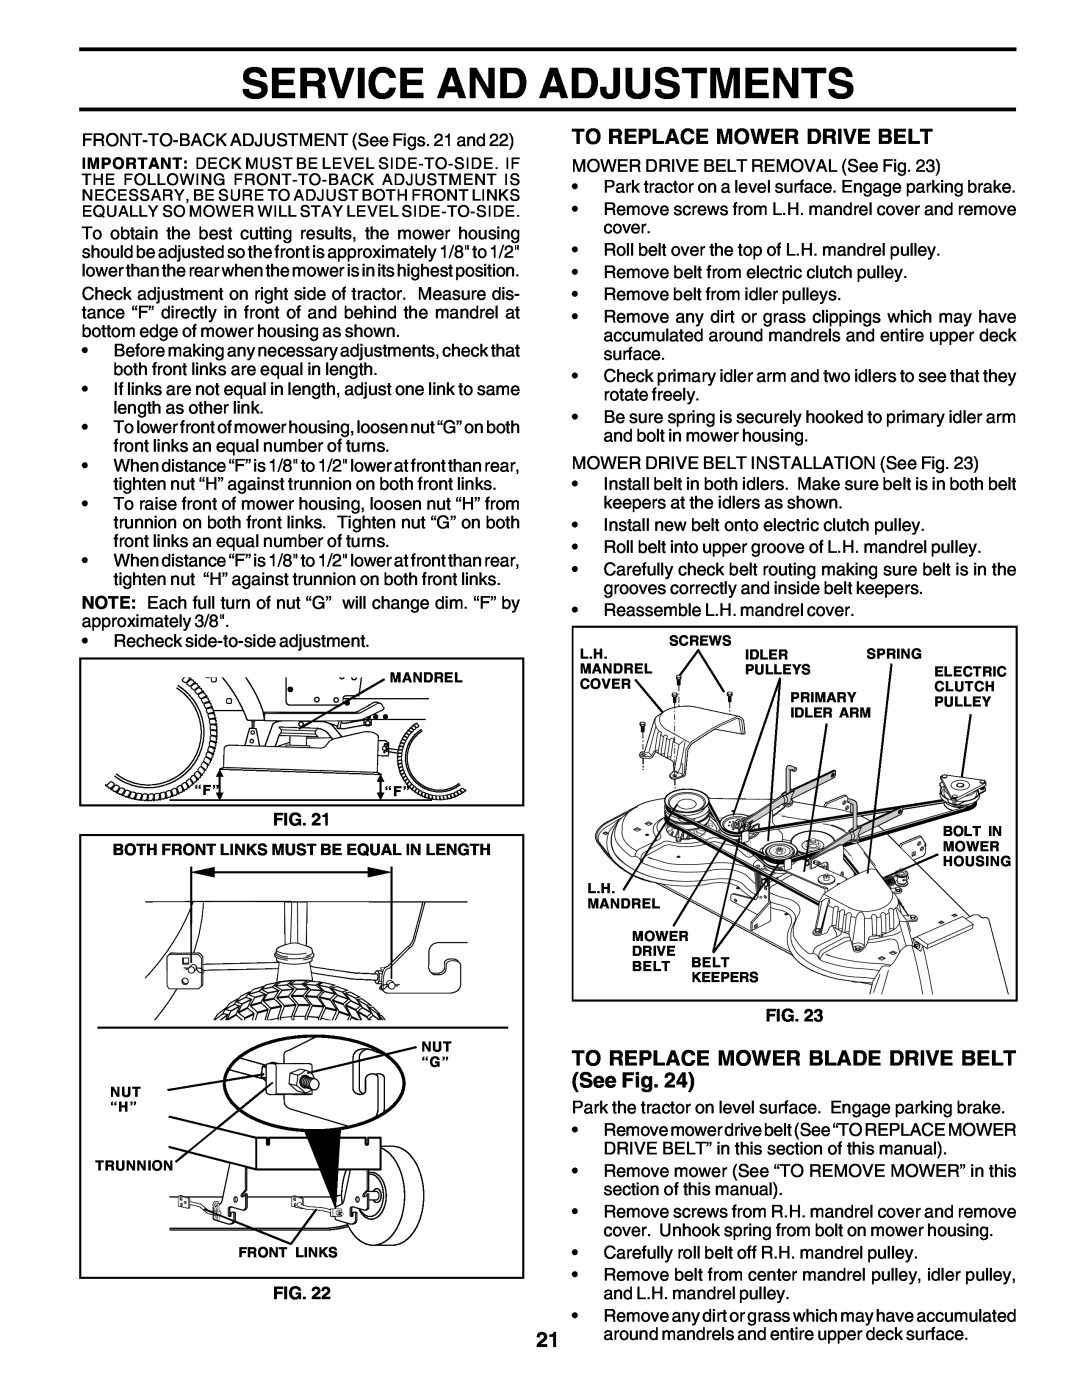 Poulan 177937 owner manual Service And Adjustments, To Replace Mower Drive Belt, TO REPLACE MOWER BLADE DRIVE BELT See Fig 